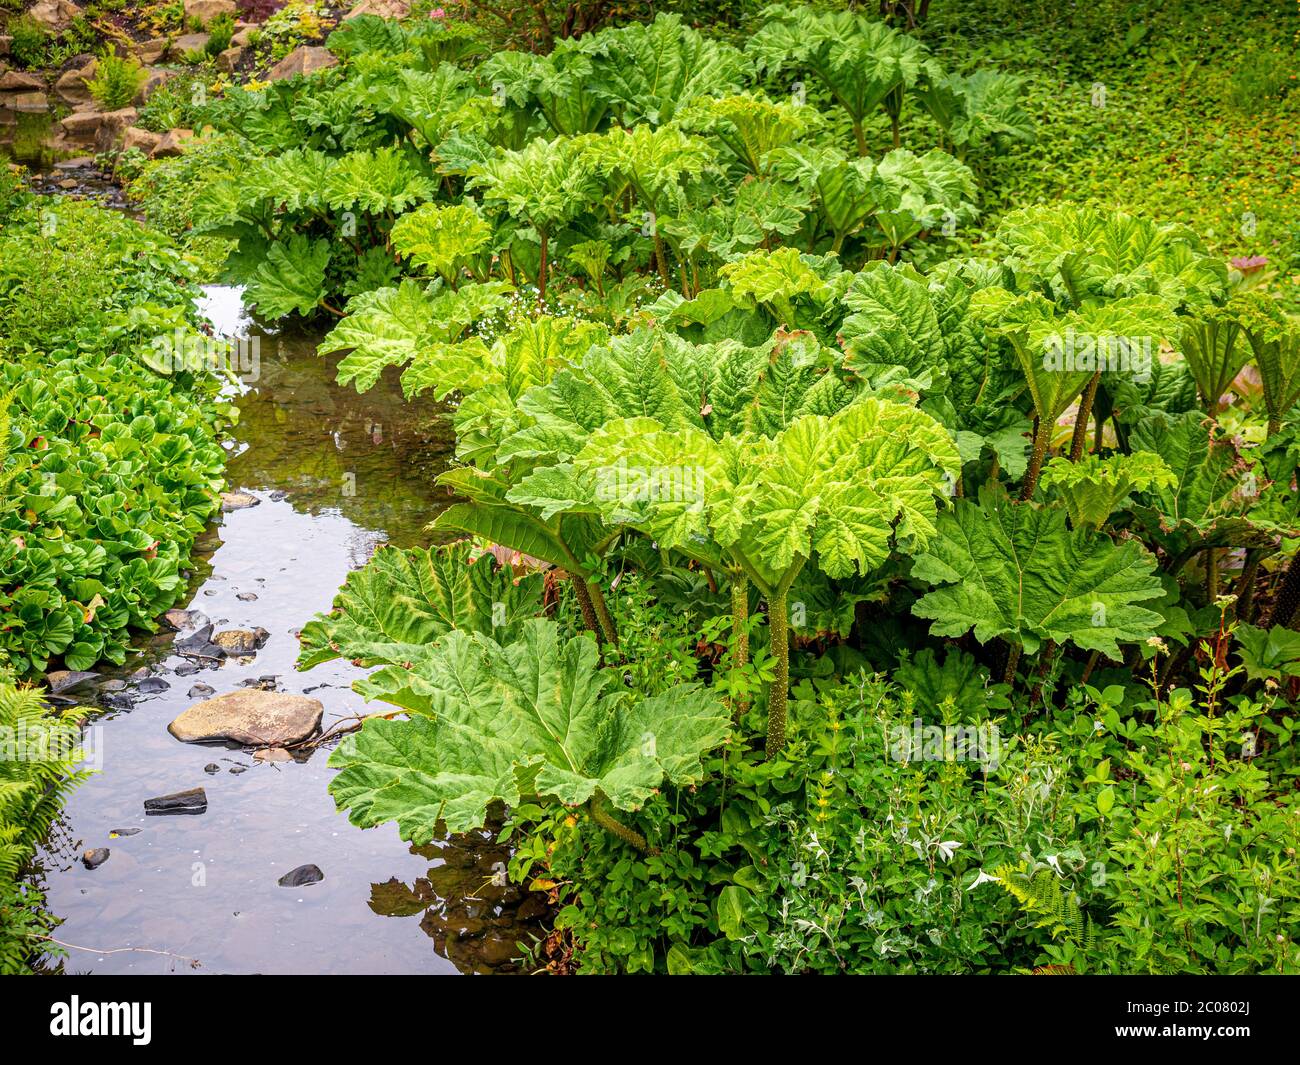 Gunnera manicata, also known as giant rhubarb growing next to a stream in a UK garden. Stock Photo